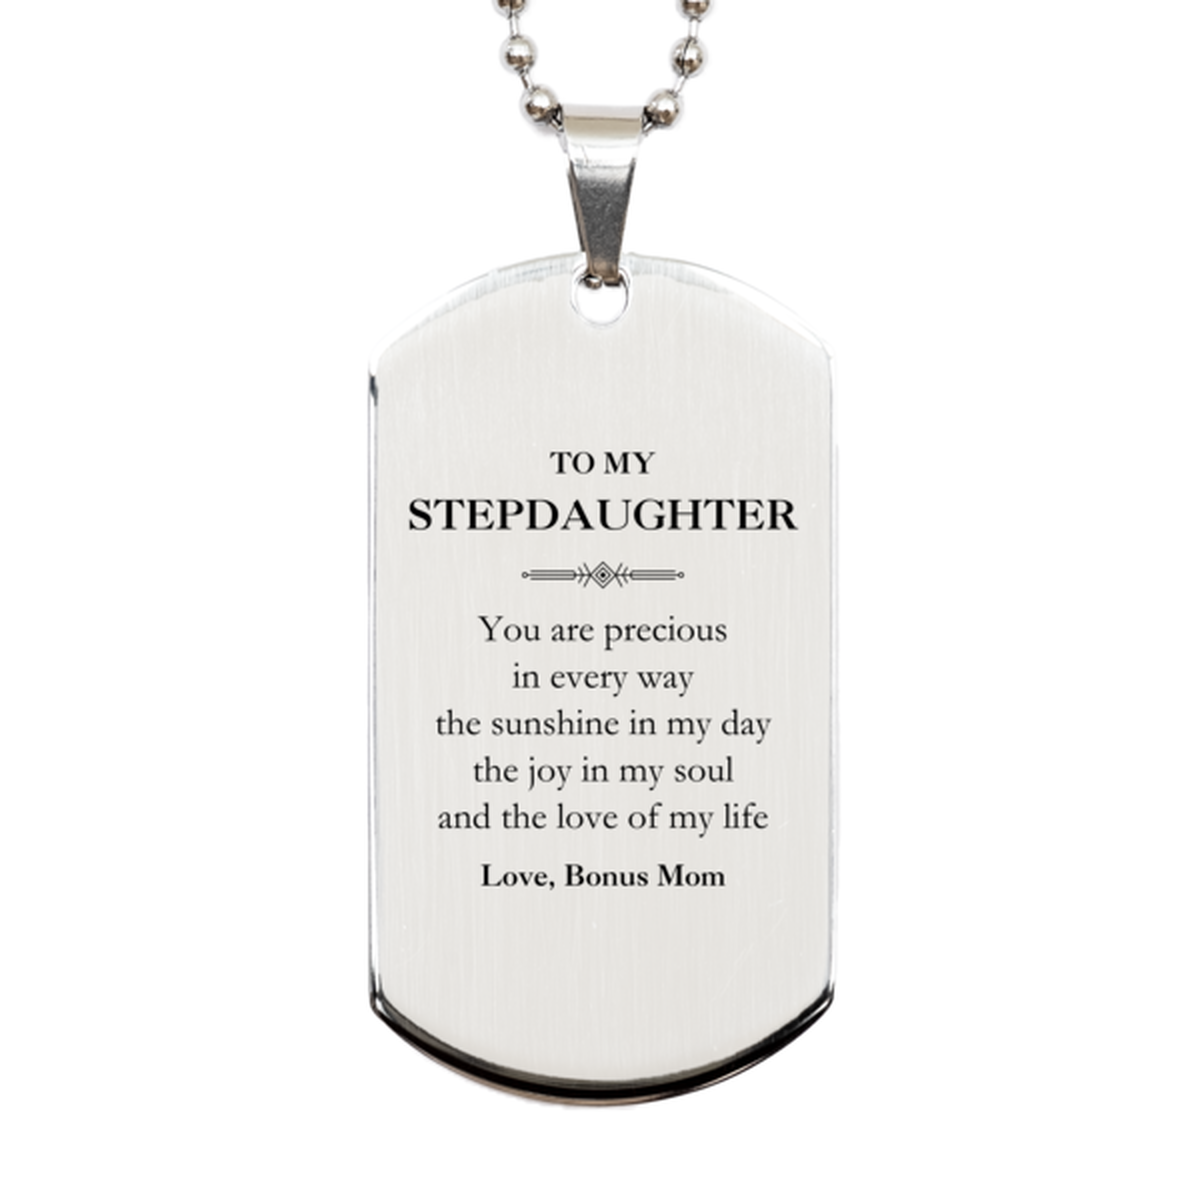 Graduation Gifts for Stepdaughter Silver Dog Tag Present from Bonus Mom, Christmas Stepdaughter Birthday Gifts Stepdaughter You are precious in every way the sunshine in my day. Love, Bonus Mom